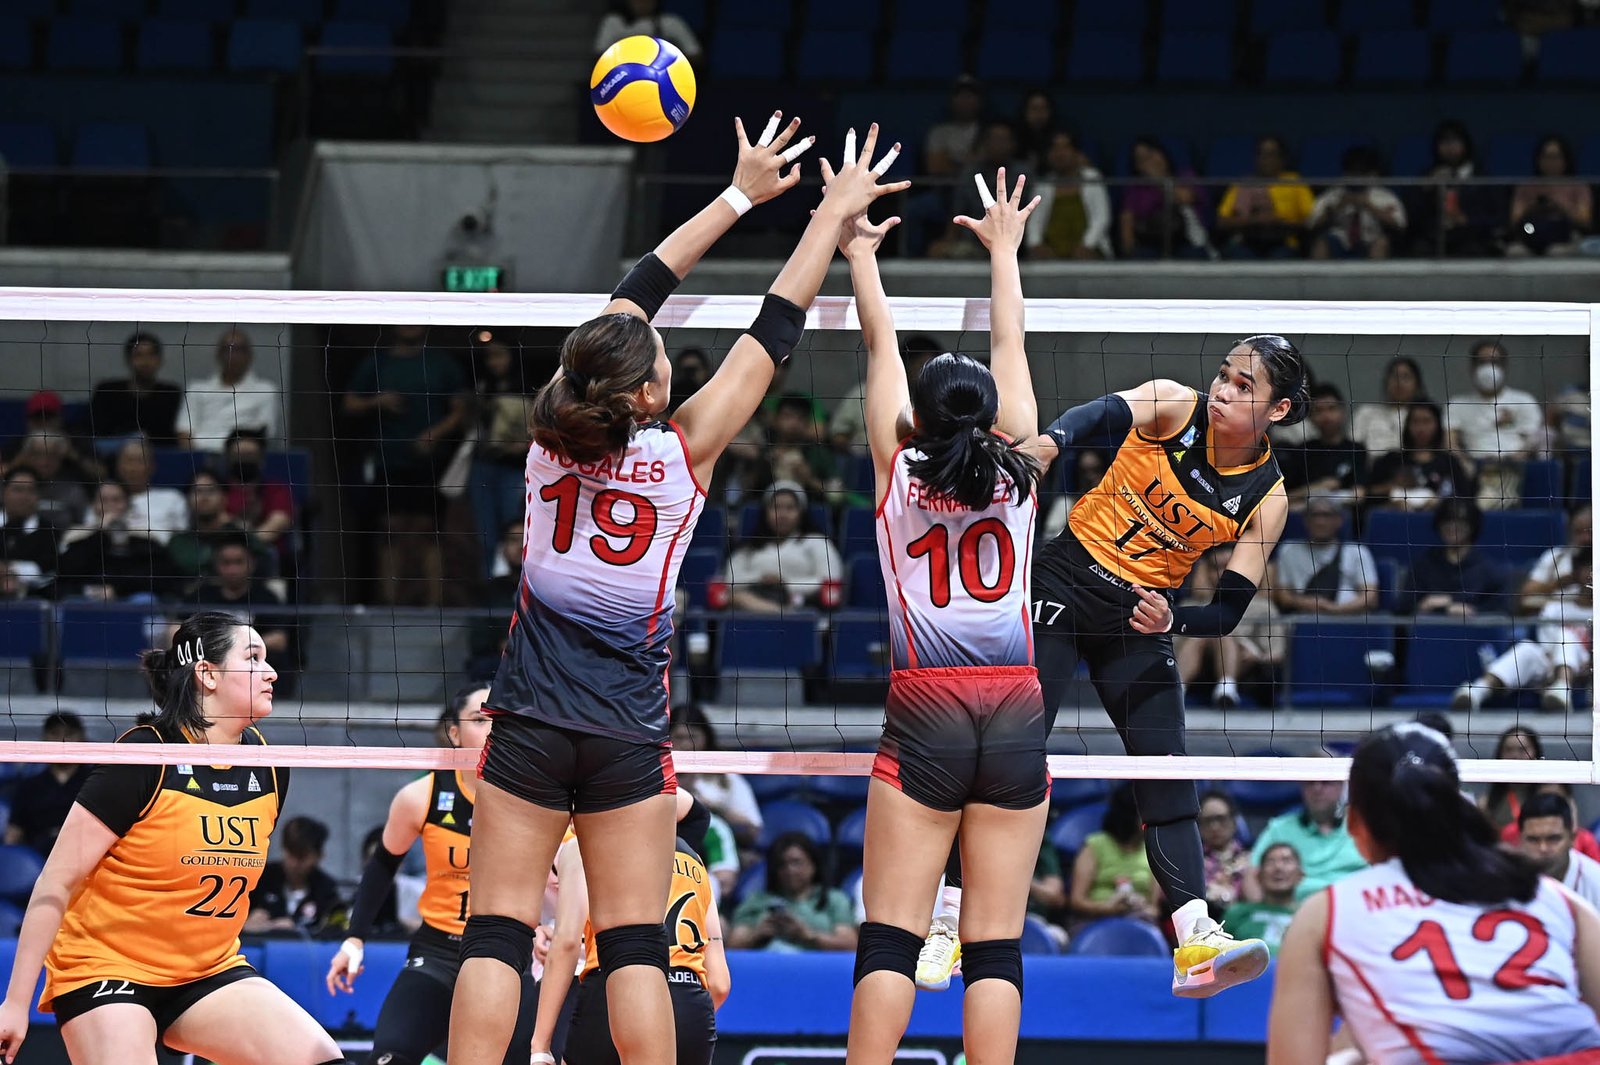 Back in full form, Poyos powers UST past UE